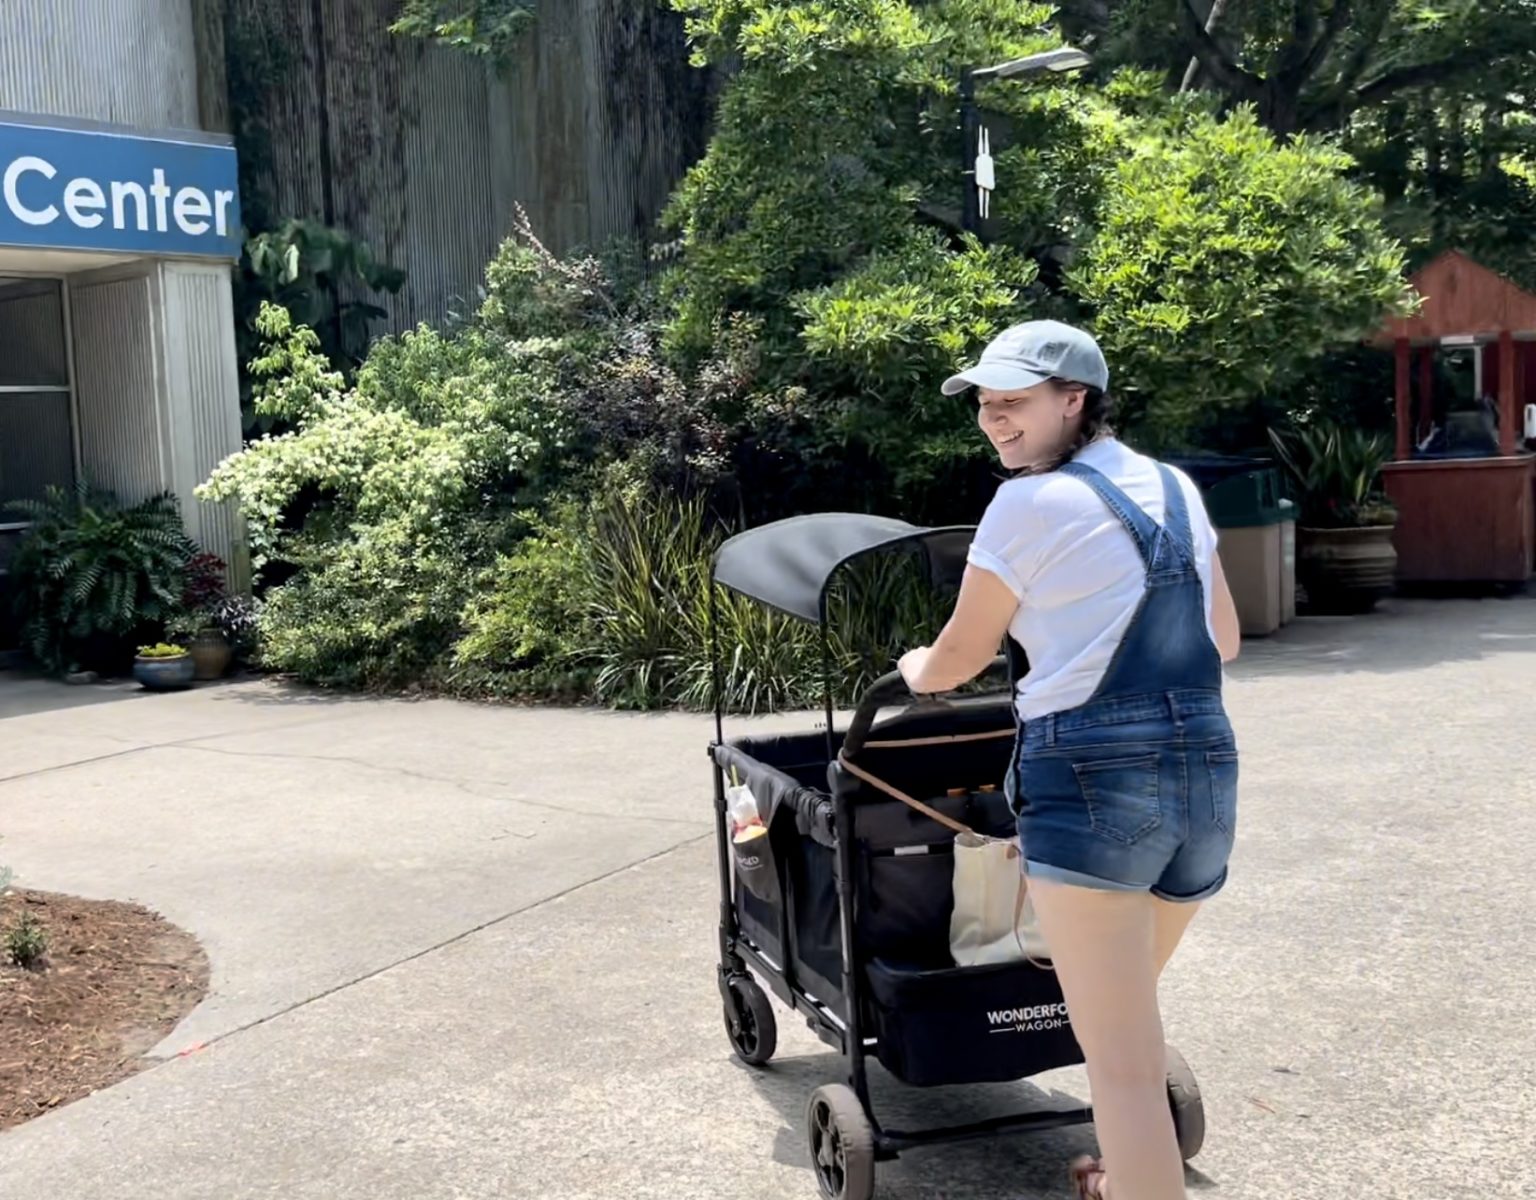 Can You Take Your Wonderfold Wagon to The Zoo?